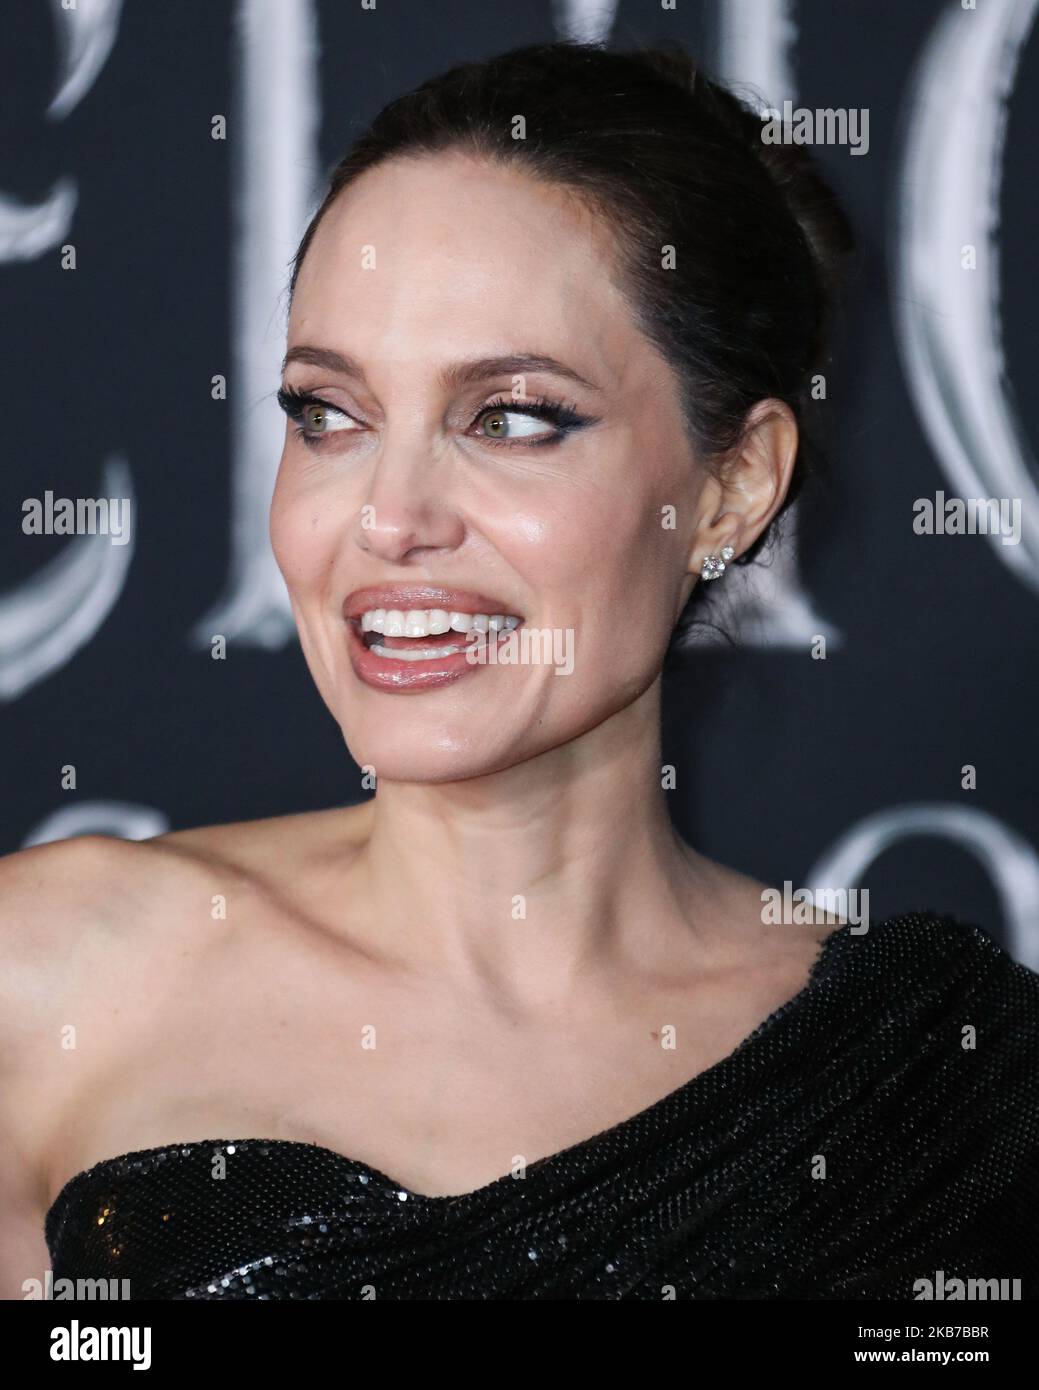 HOLLYWOOD, LOS ANGELES, CALIFORNIA, USA - SEPTEMBER 30: Actress Angelina Jolie wearing Atelier Versace with Cartier jewelry arrives at the World Premiere Of Disney's 'Maleficent: Mistress Of Evil' held at the El Capitan Theatre on September 30, 2019 in Hollywood, Los Angeles, California, United States. (Photo by Xavier Collin/Image Press Agency/NurPhoto) Stock Photo